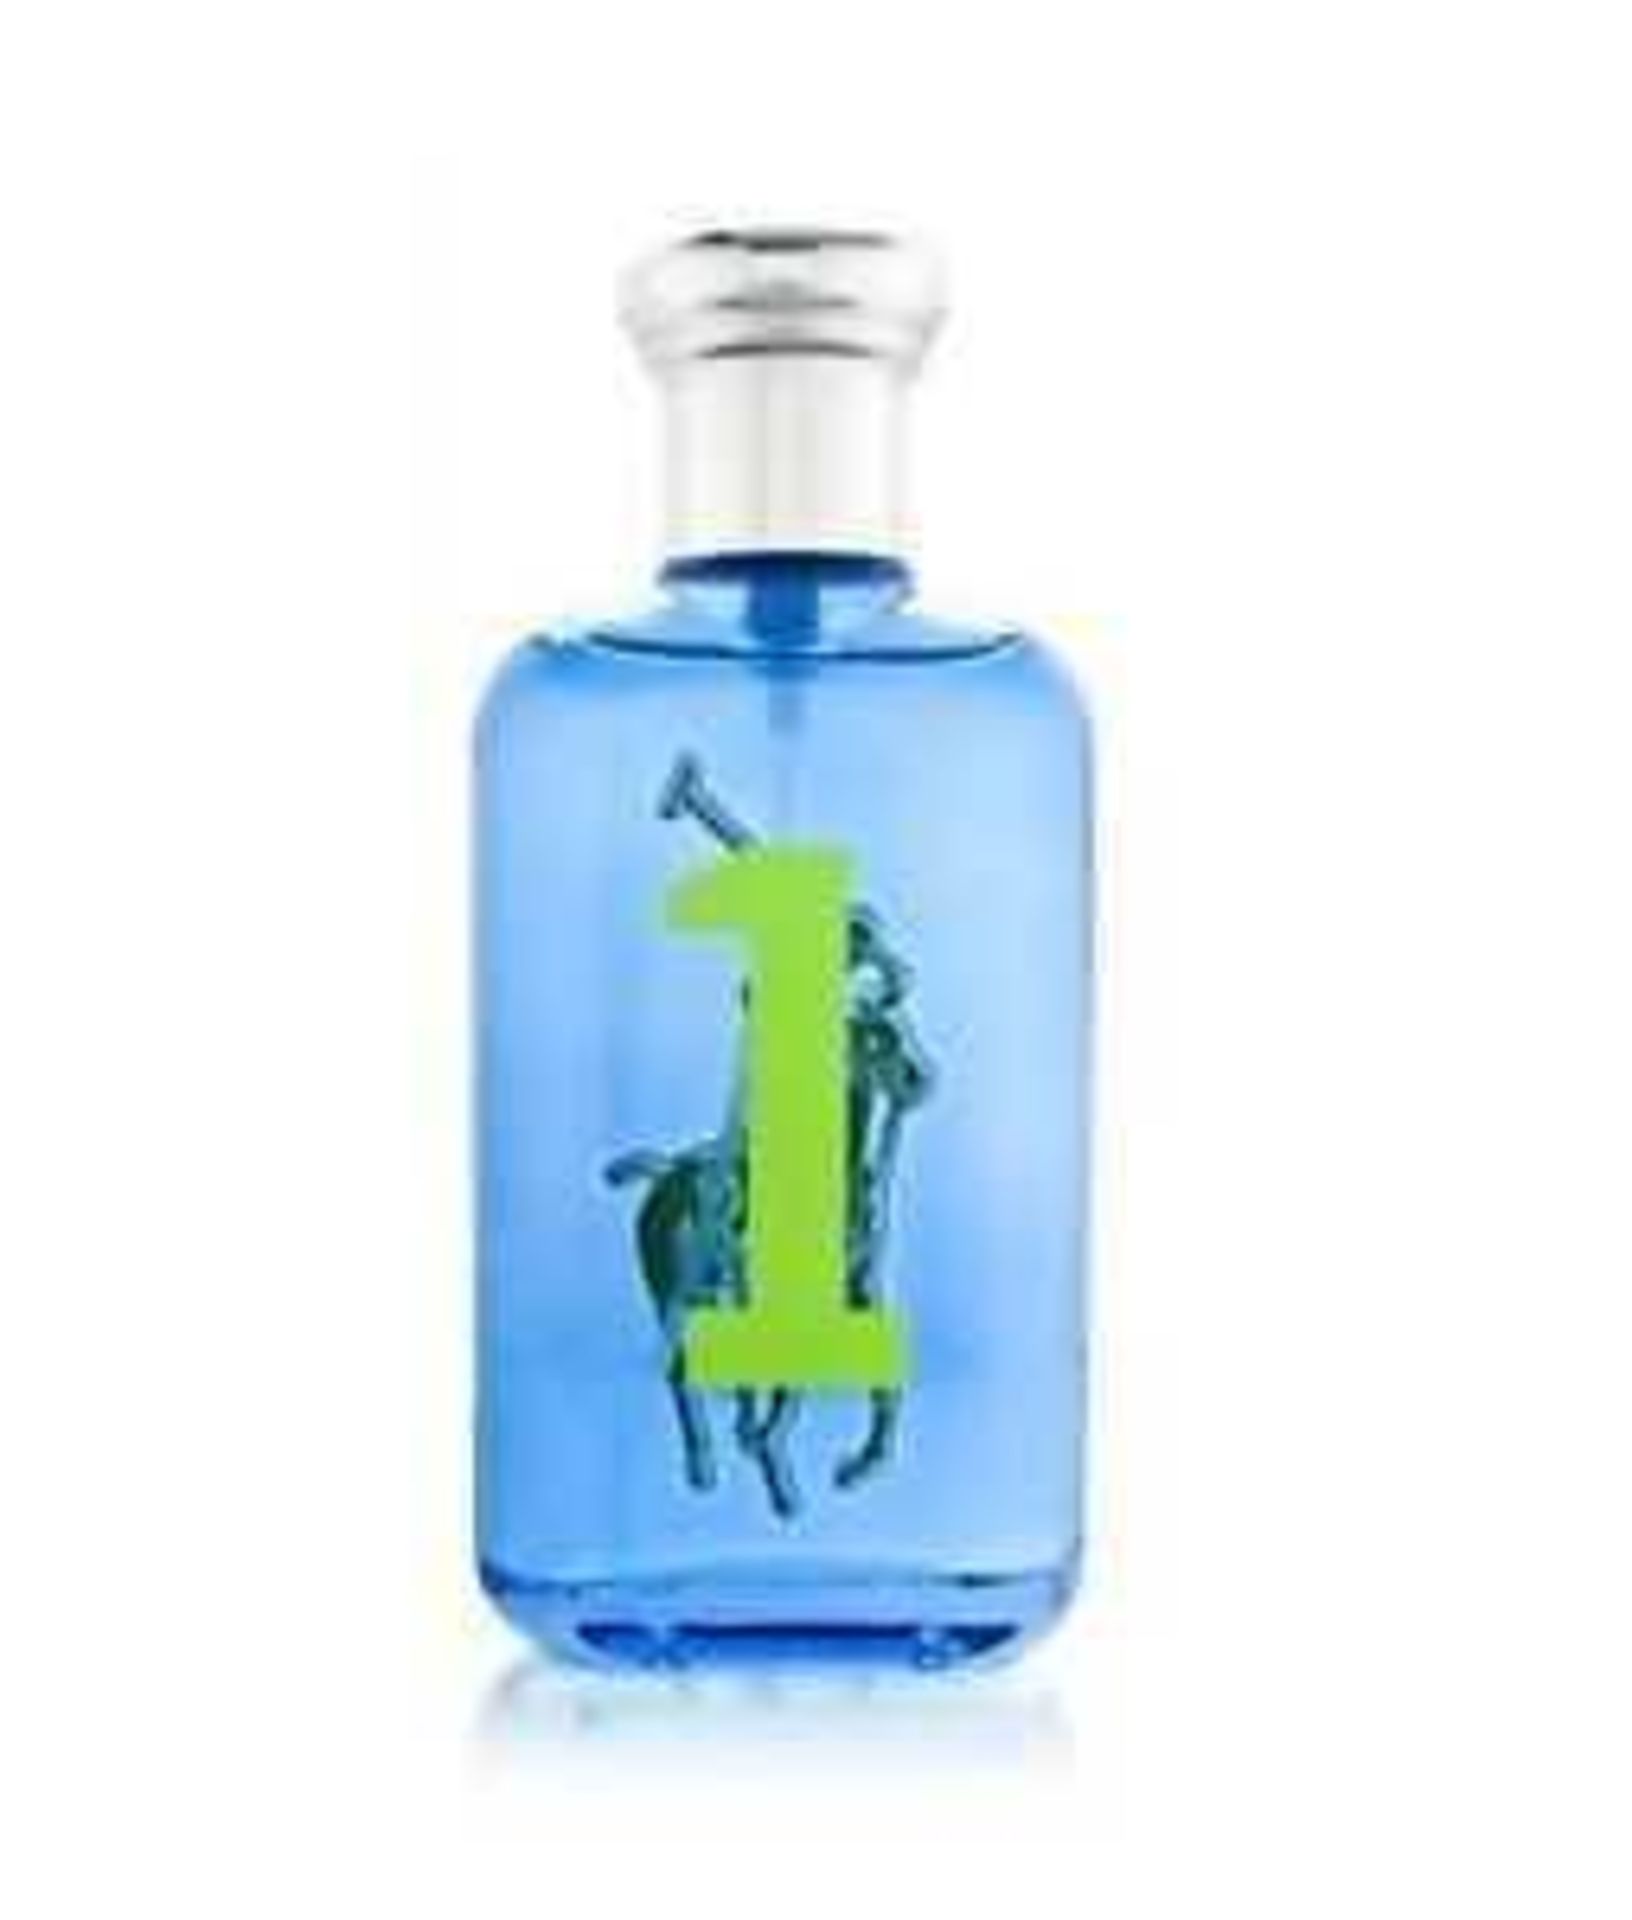 RRP £70 Brand New Boxed And Sealed 100Ml Tester Of Ralph Lauren The Big Pony Collection #1 Eau De To - Image 2 of 2